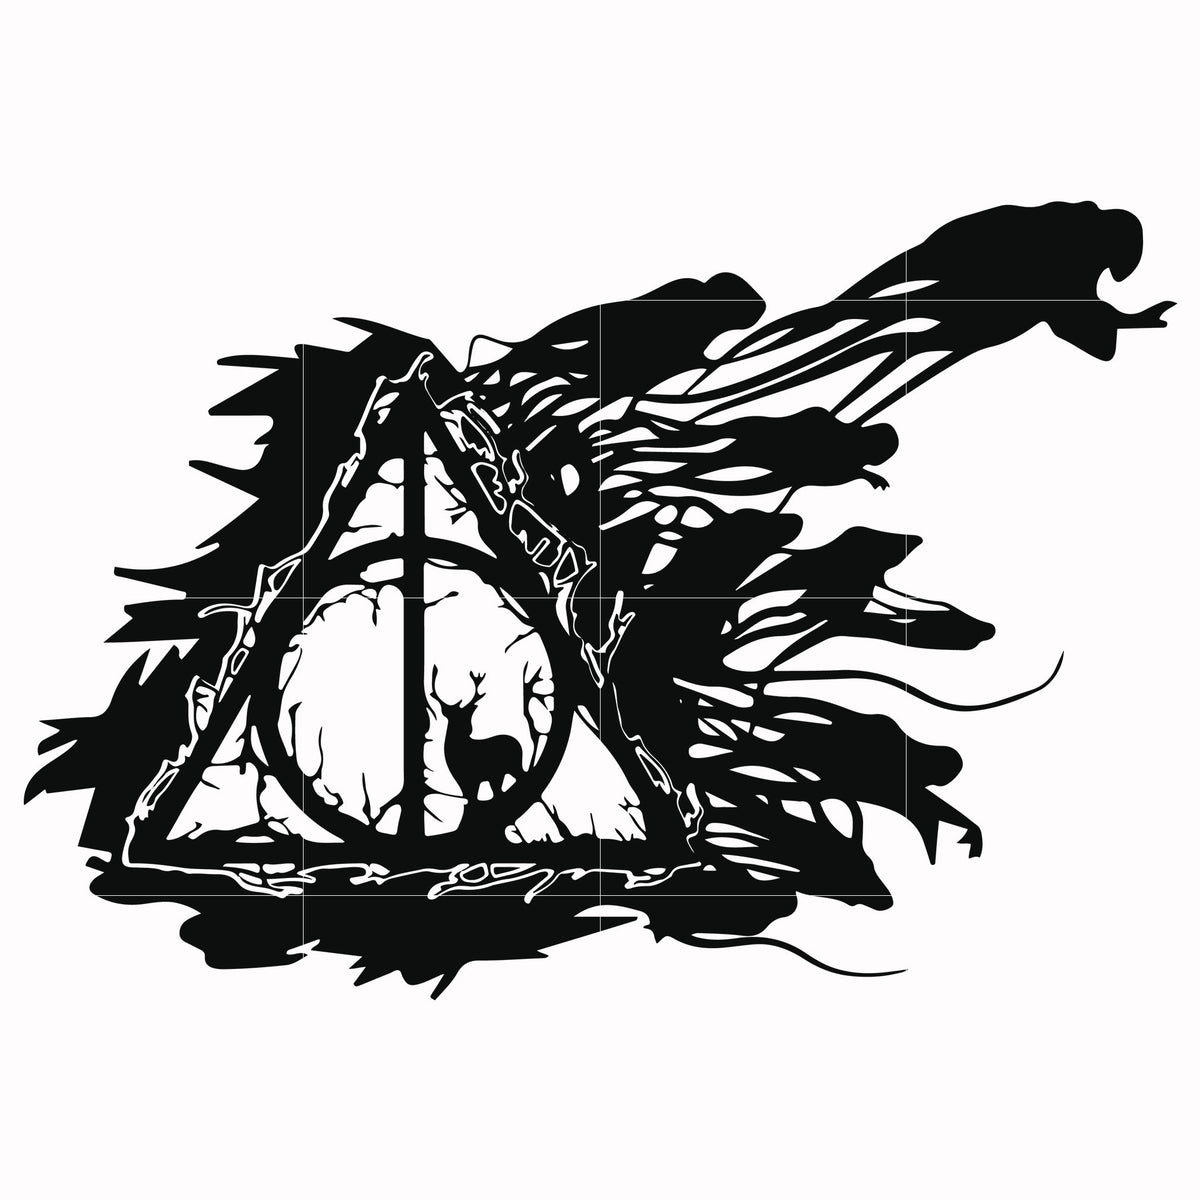 Harry potter deathy hallows shadowhunter svg, harry potter